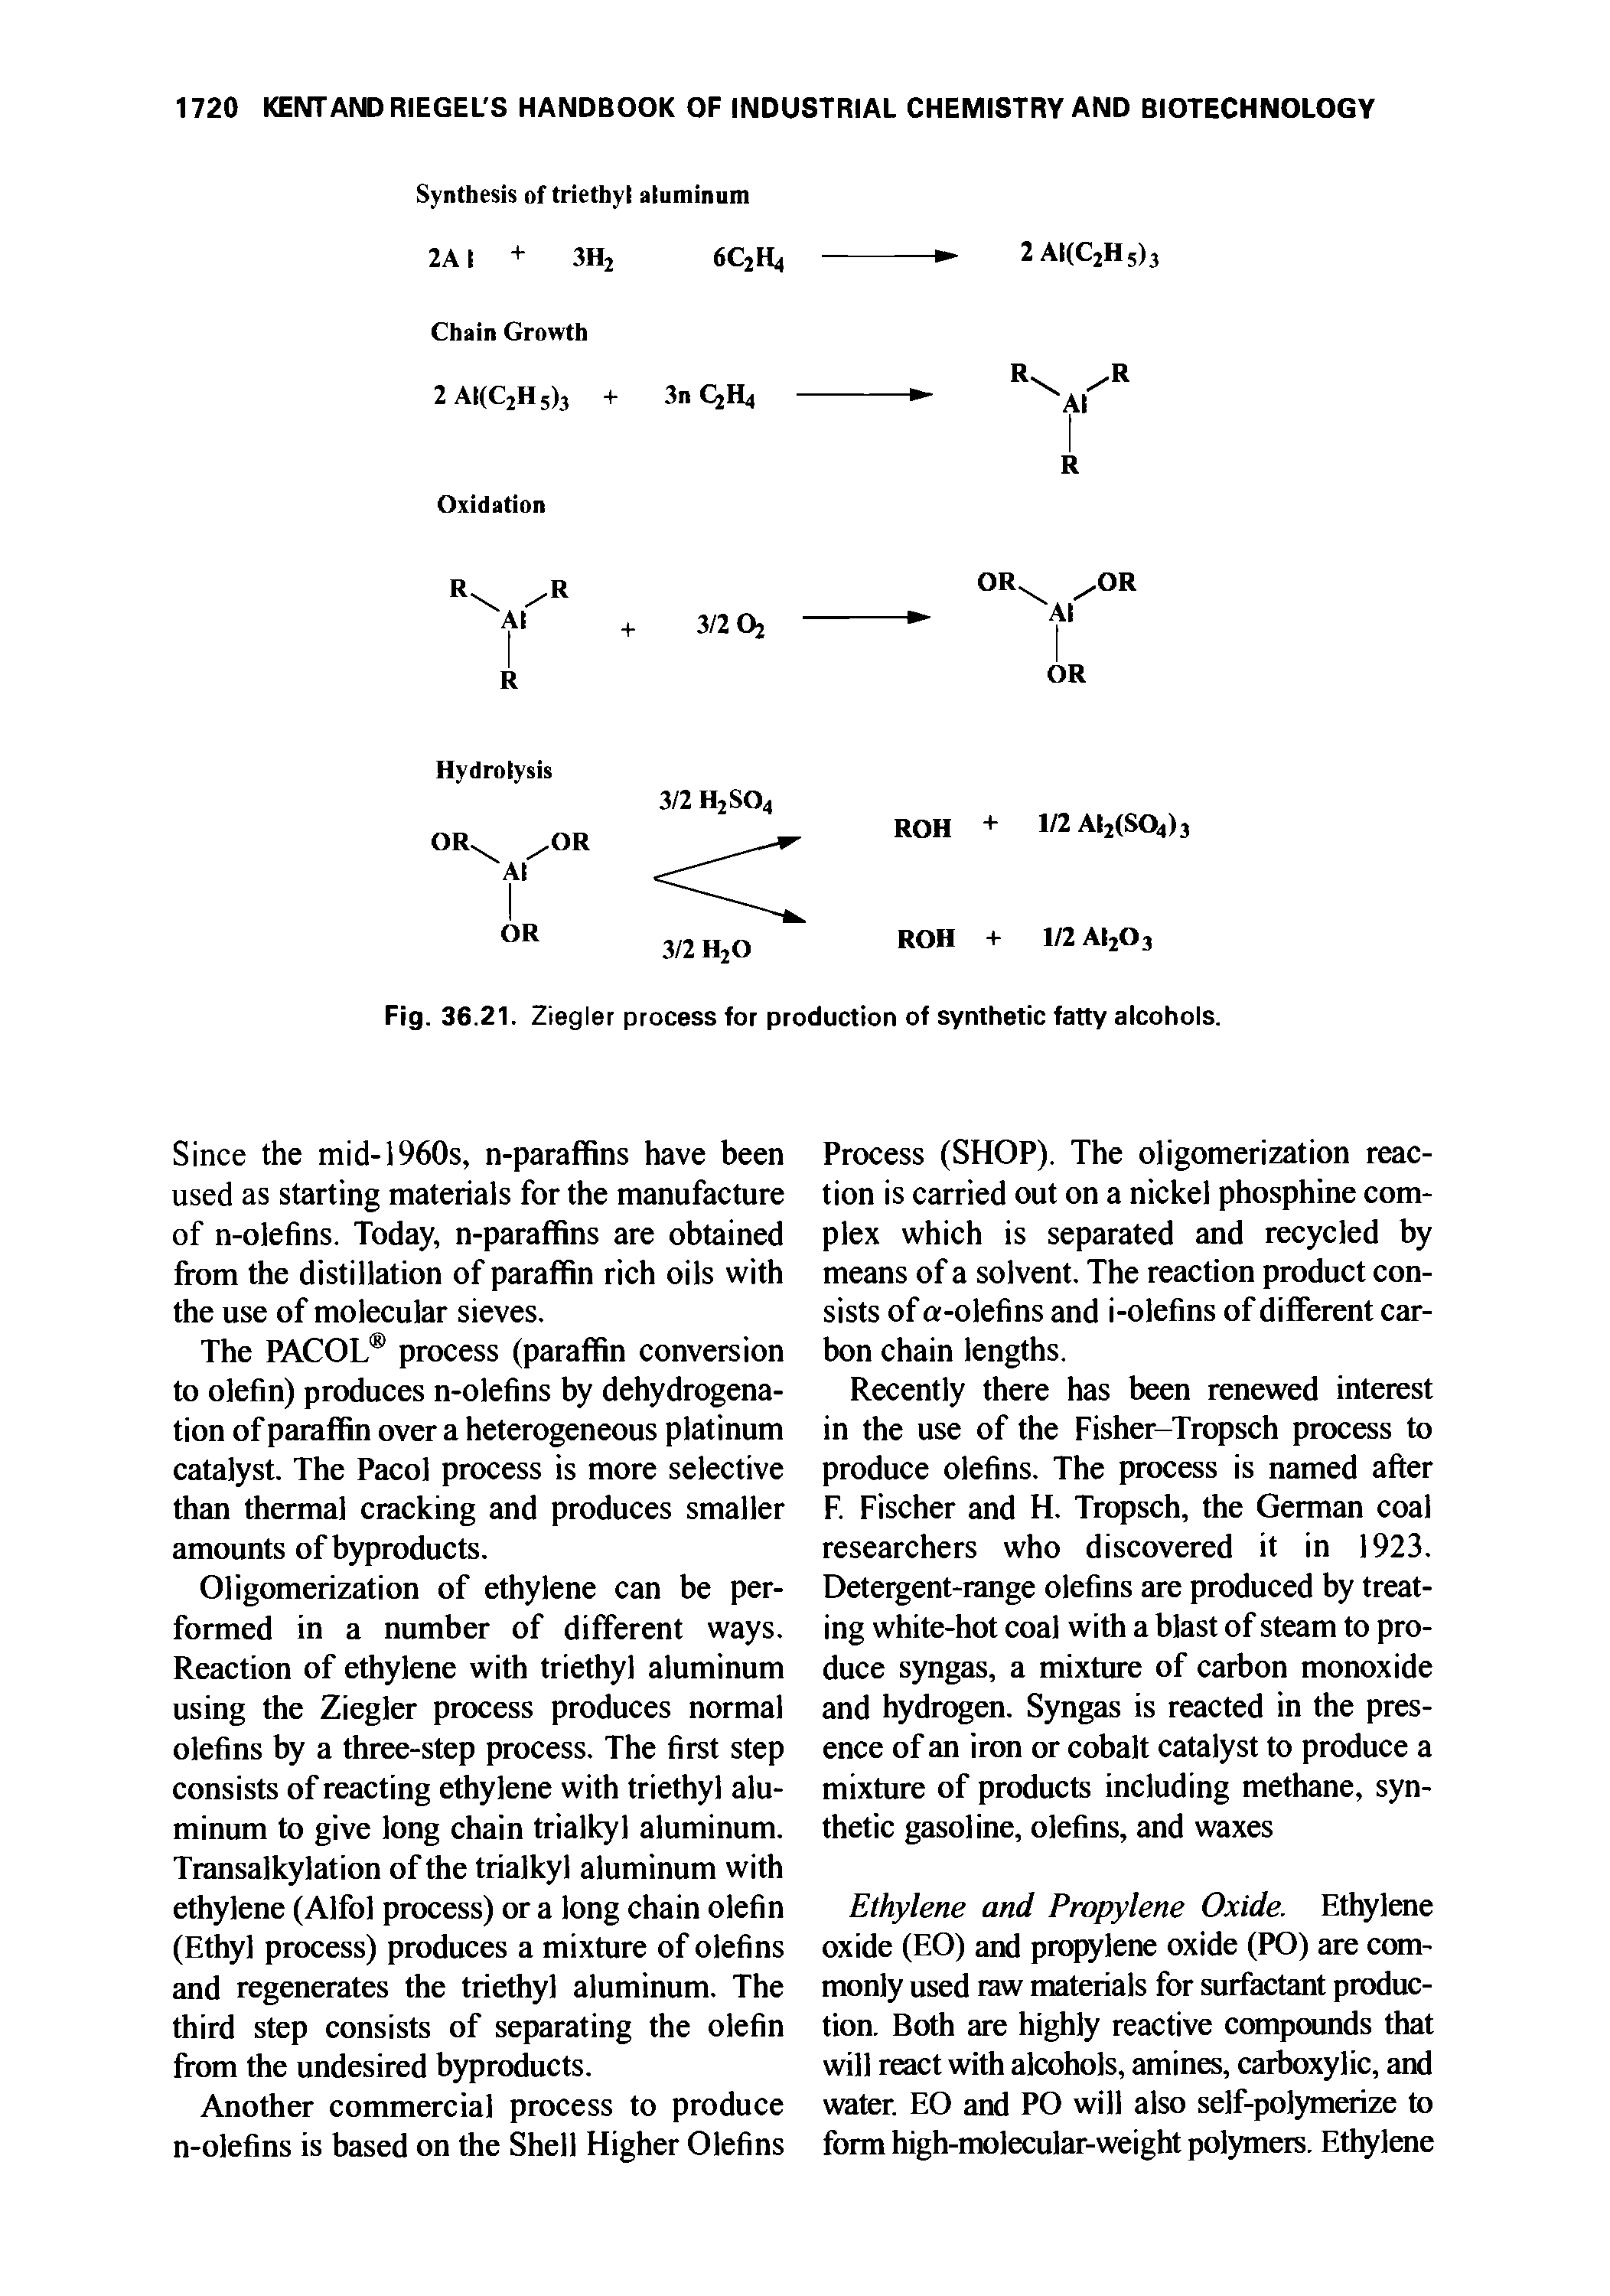 Fig. 36.21. Ziegler process for production of synthetic fatty alcohols.